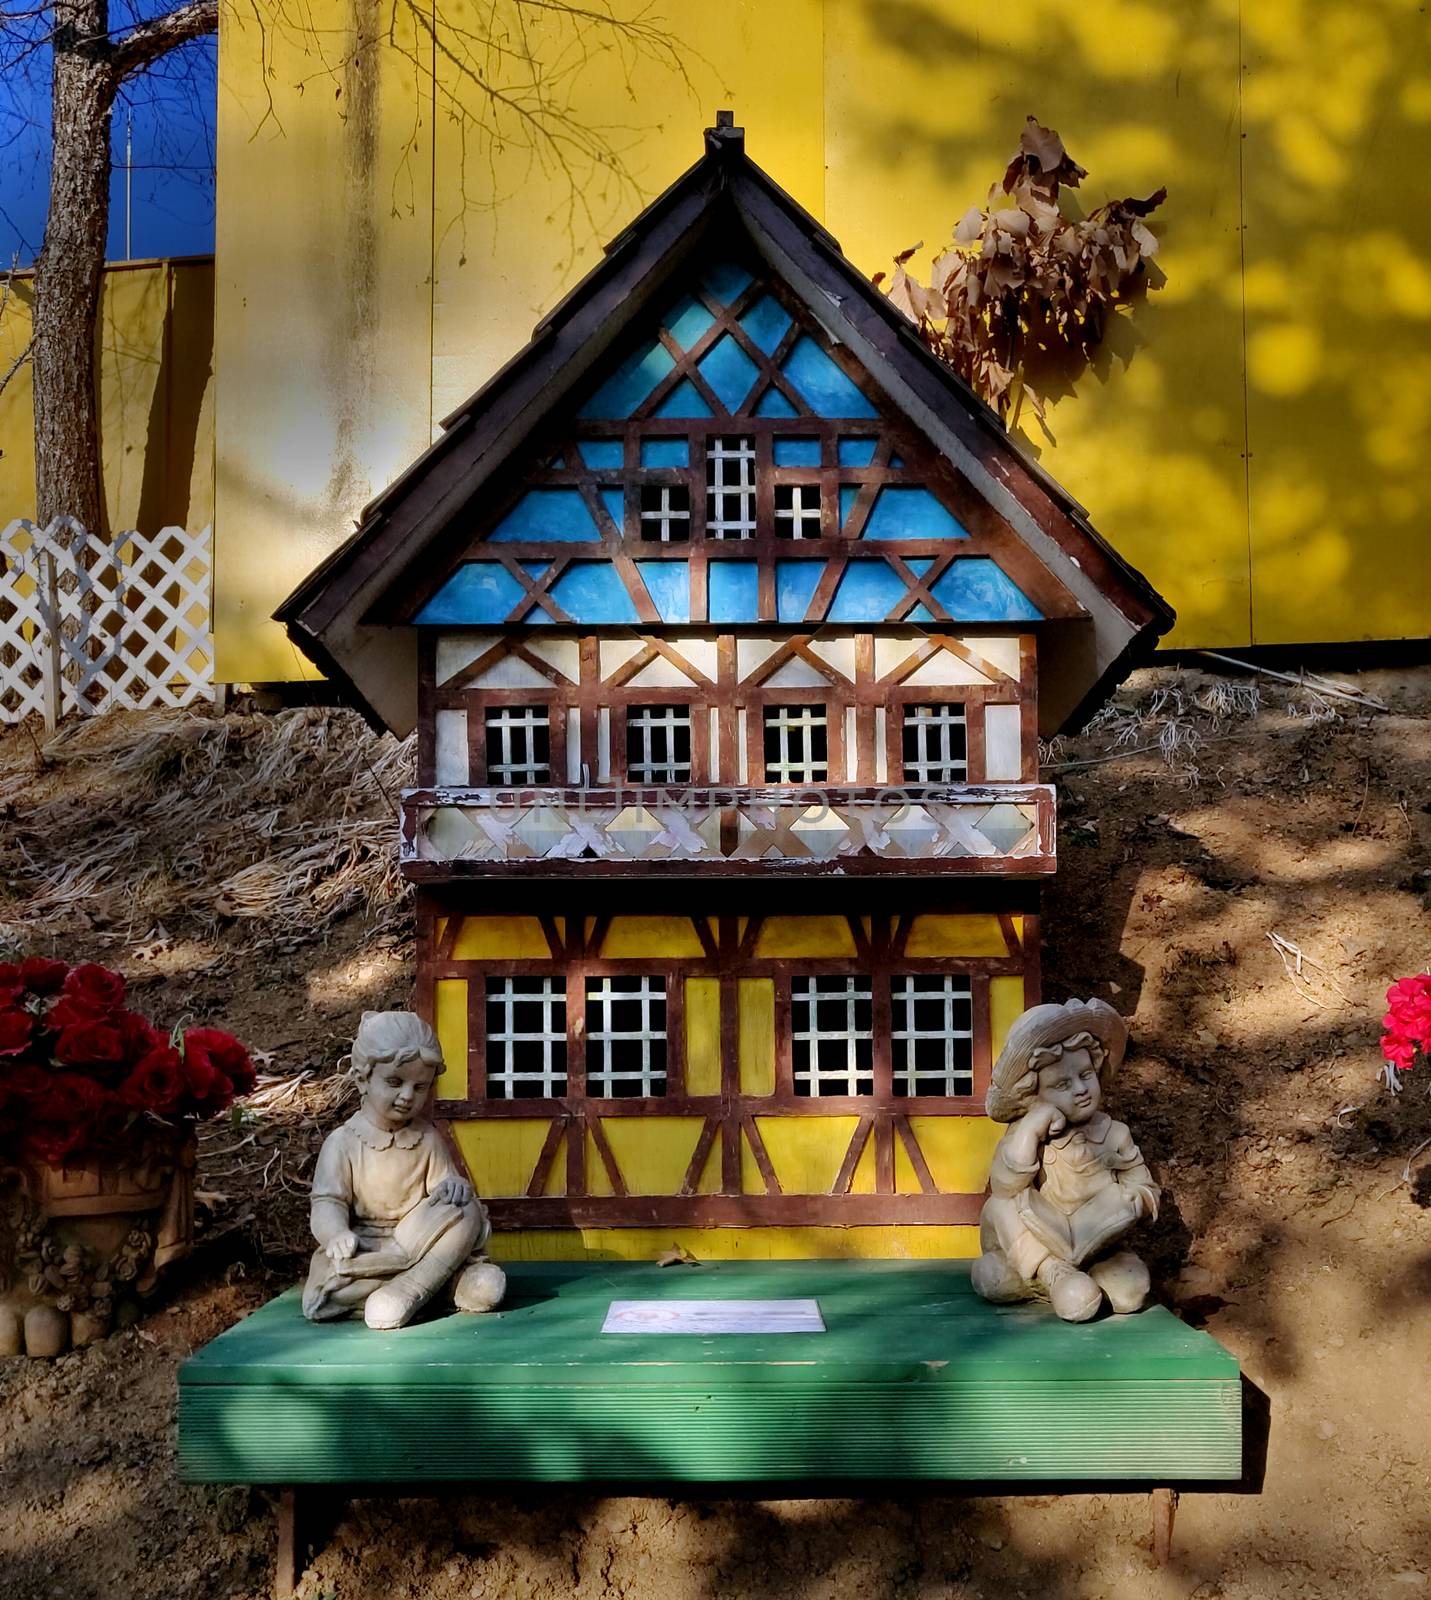 Wooden doll house with two angelic girls sitting in front by mshivangi92